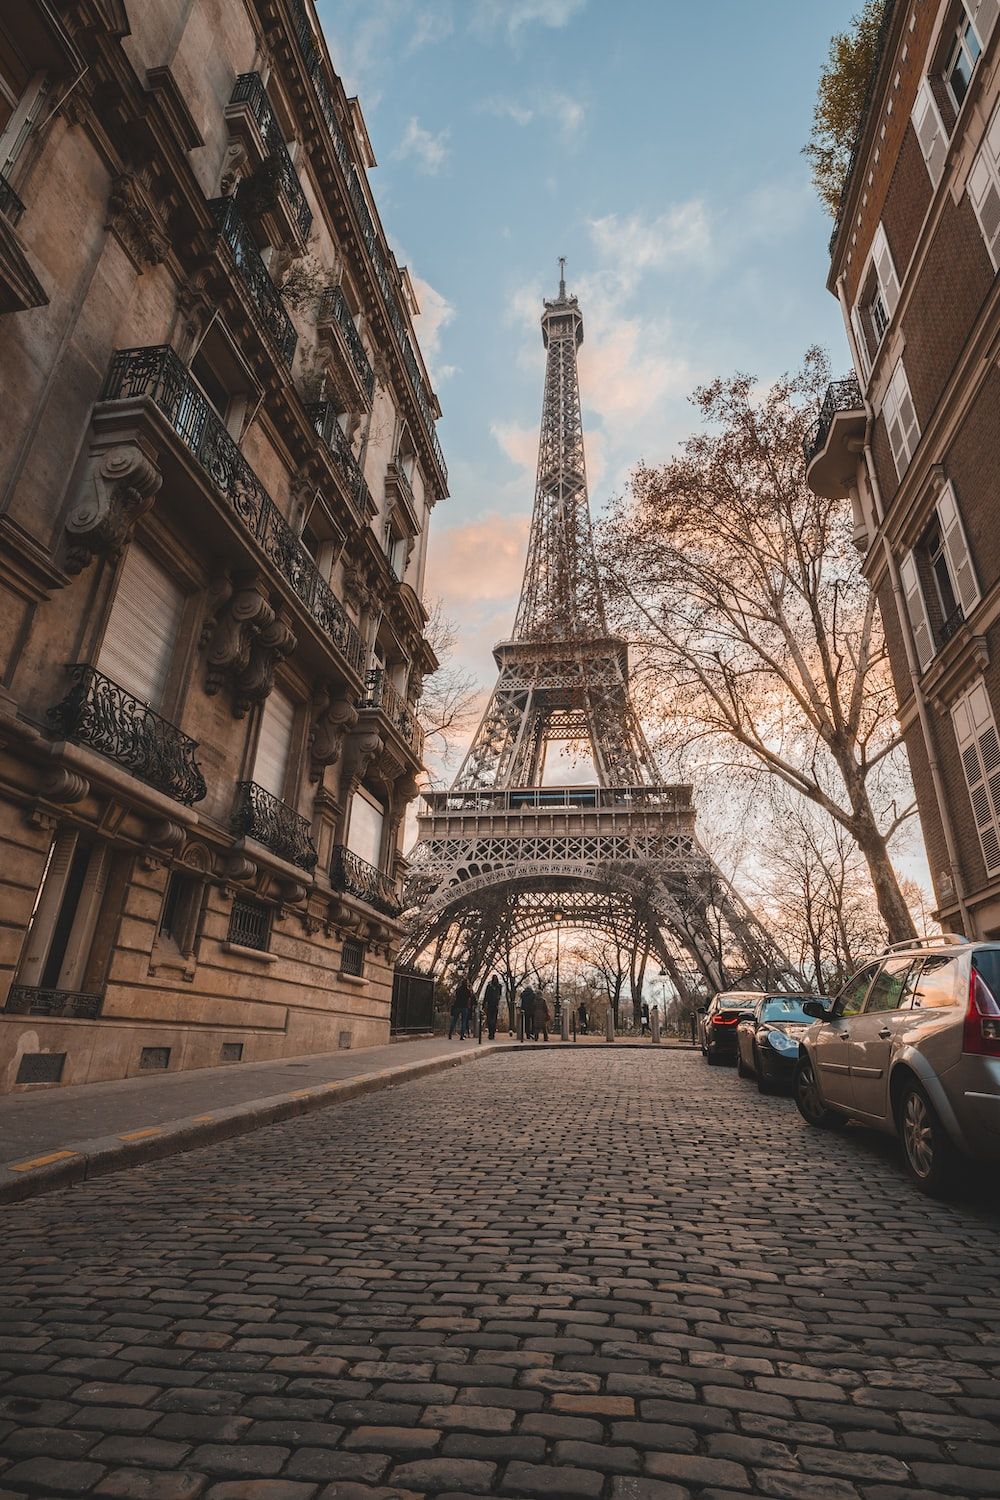 A street view of the Eiffel Tower in Paris, France. - Eiffel Tower